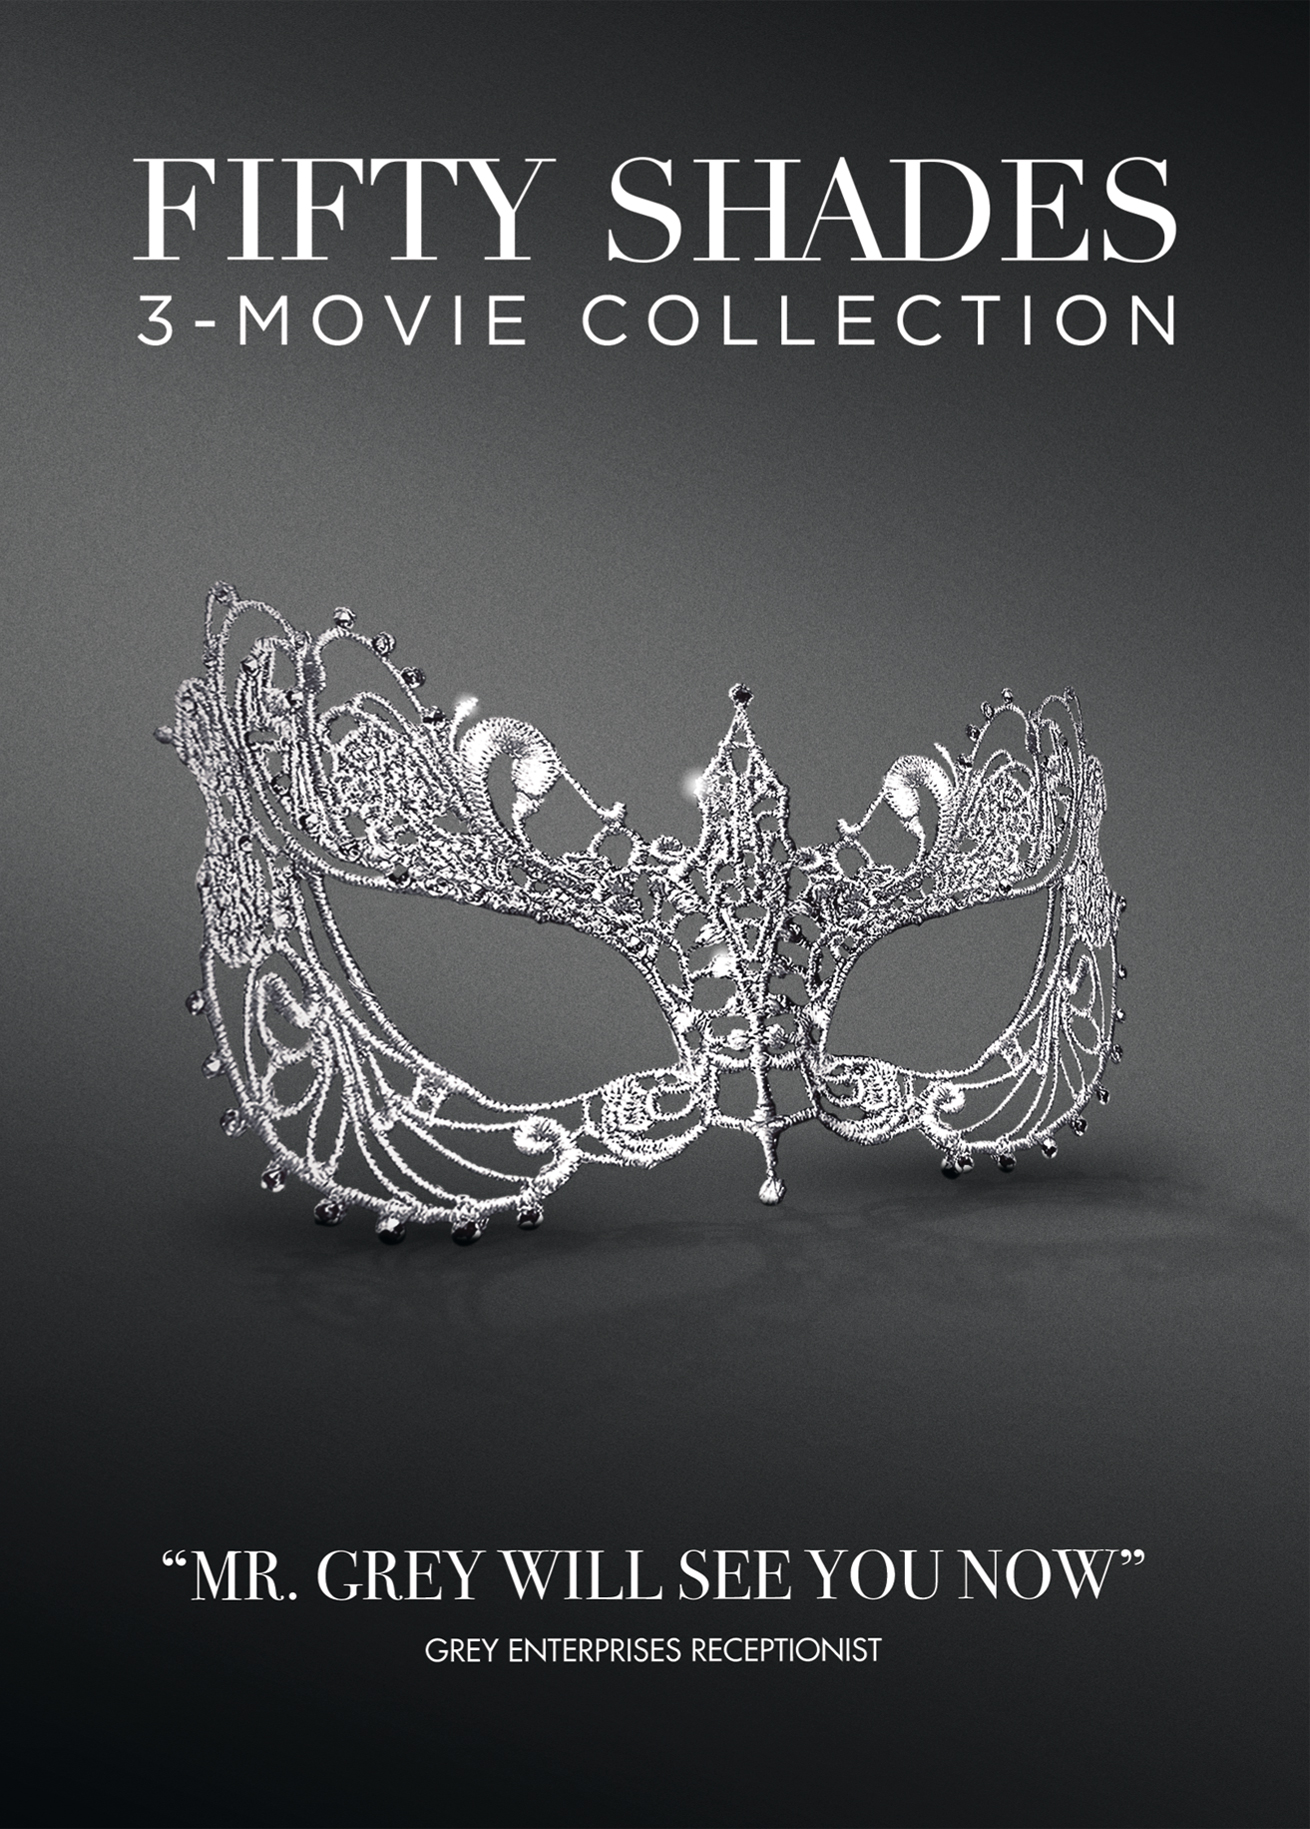 Fifty Shades 3-Movie Collection DVD